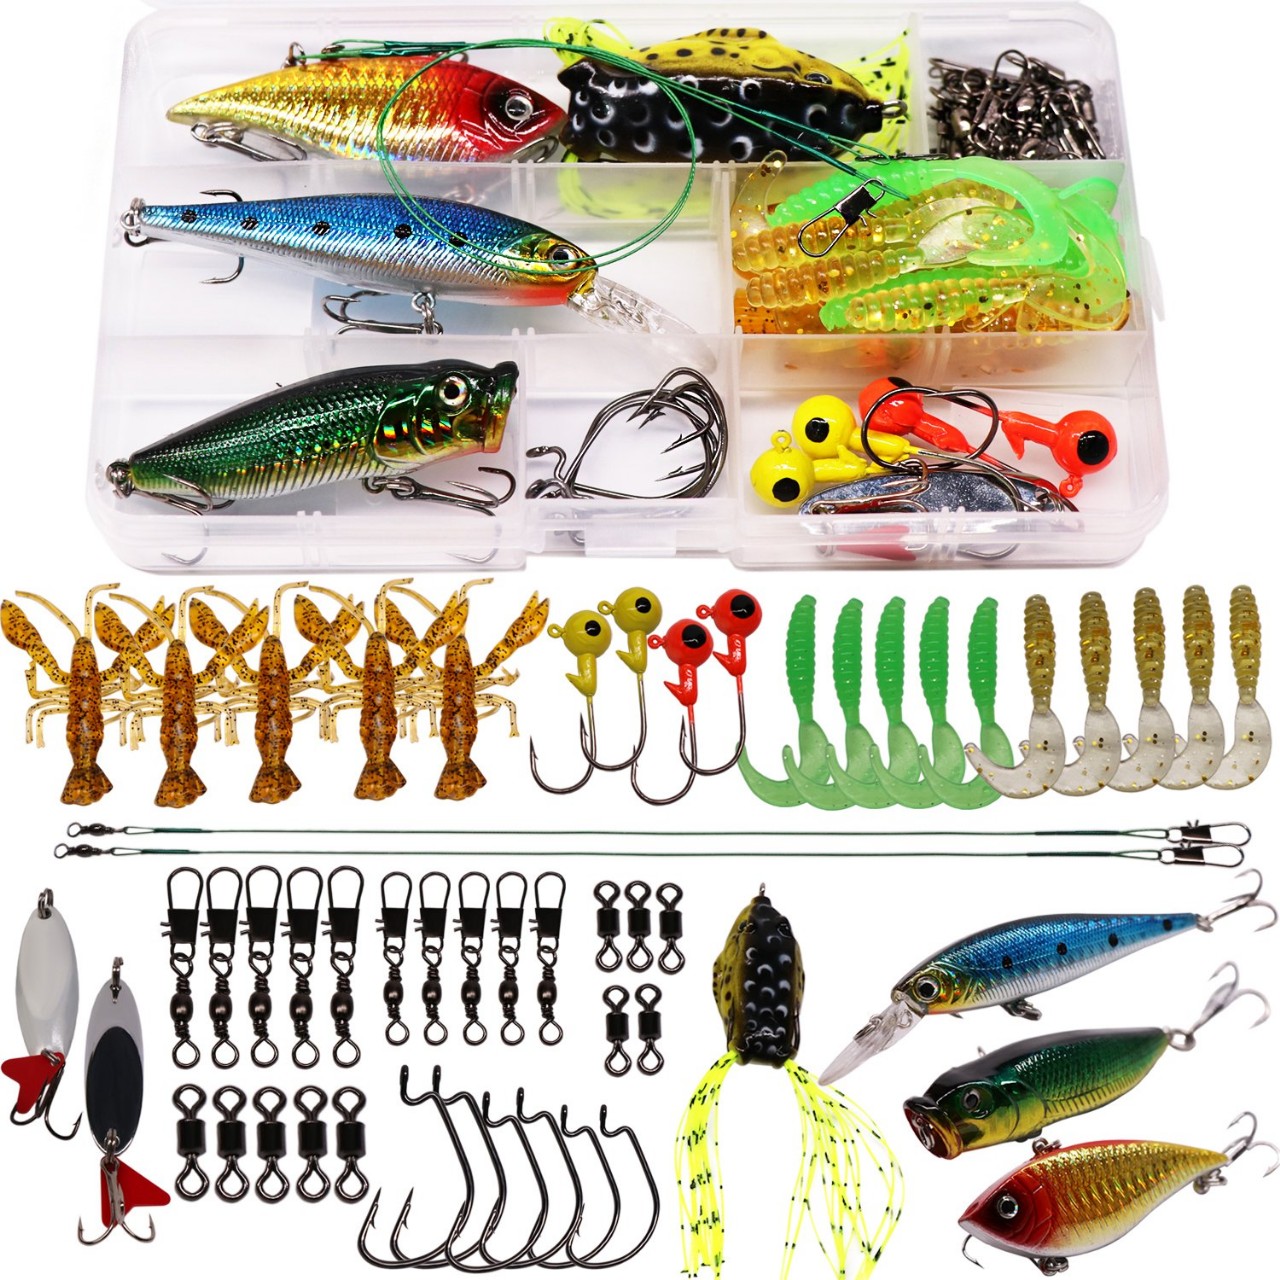 SUPERTHEO Fishing Lure Set Fishing Spoons Frog Lures Soft Hard Metal Lure Crank Popper Minnow Pencil